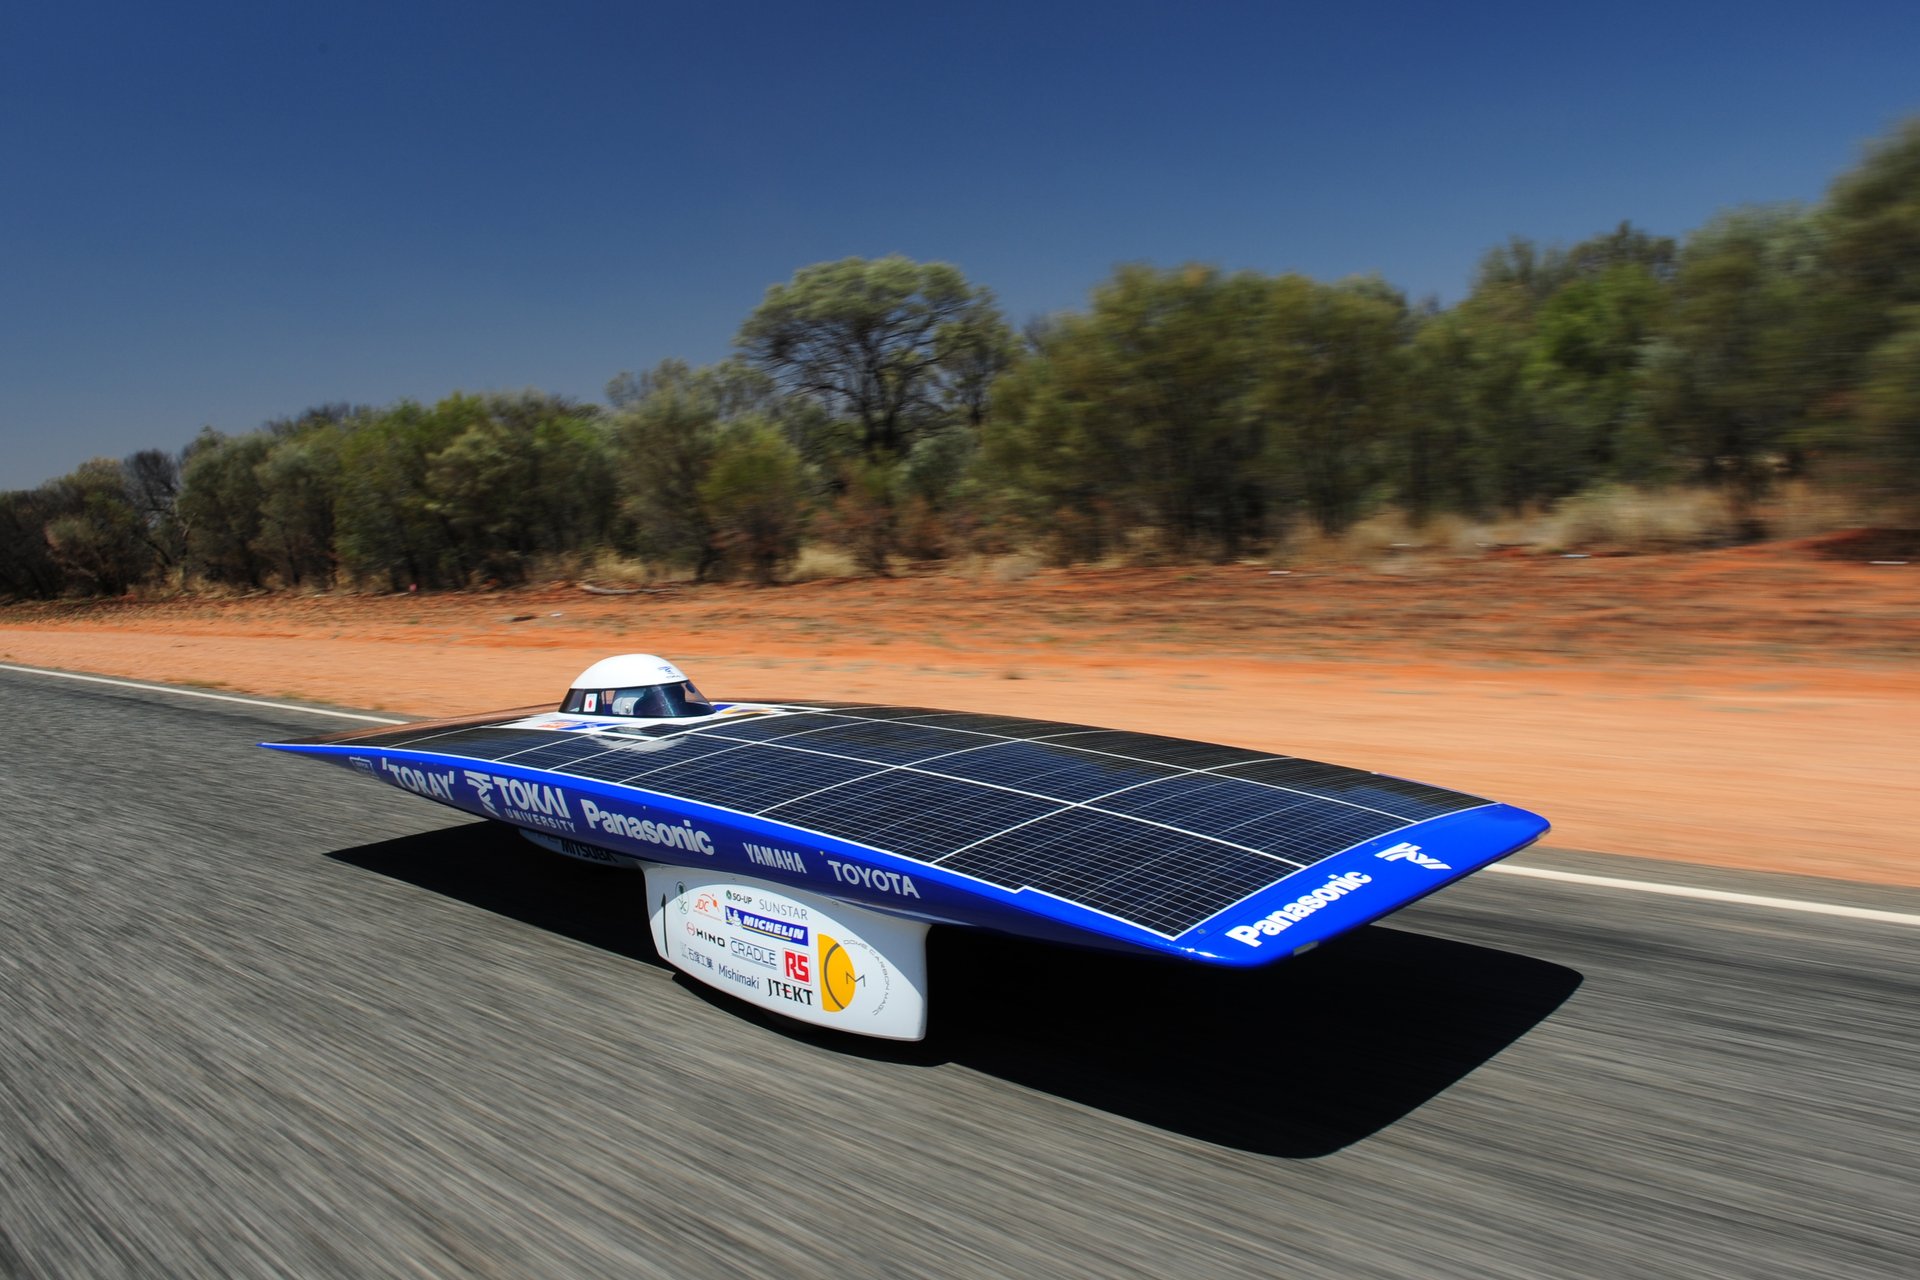 🔆Darwin to Adelaide Solar Car Race featured in new US movie "Dream Big"